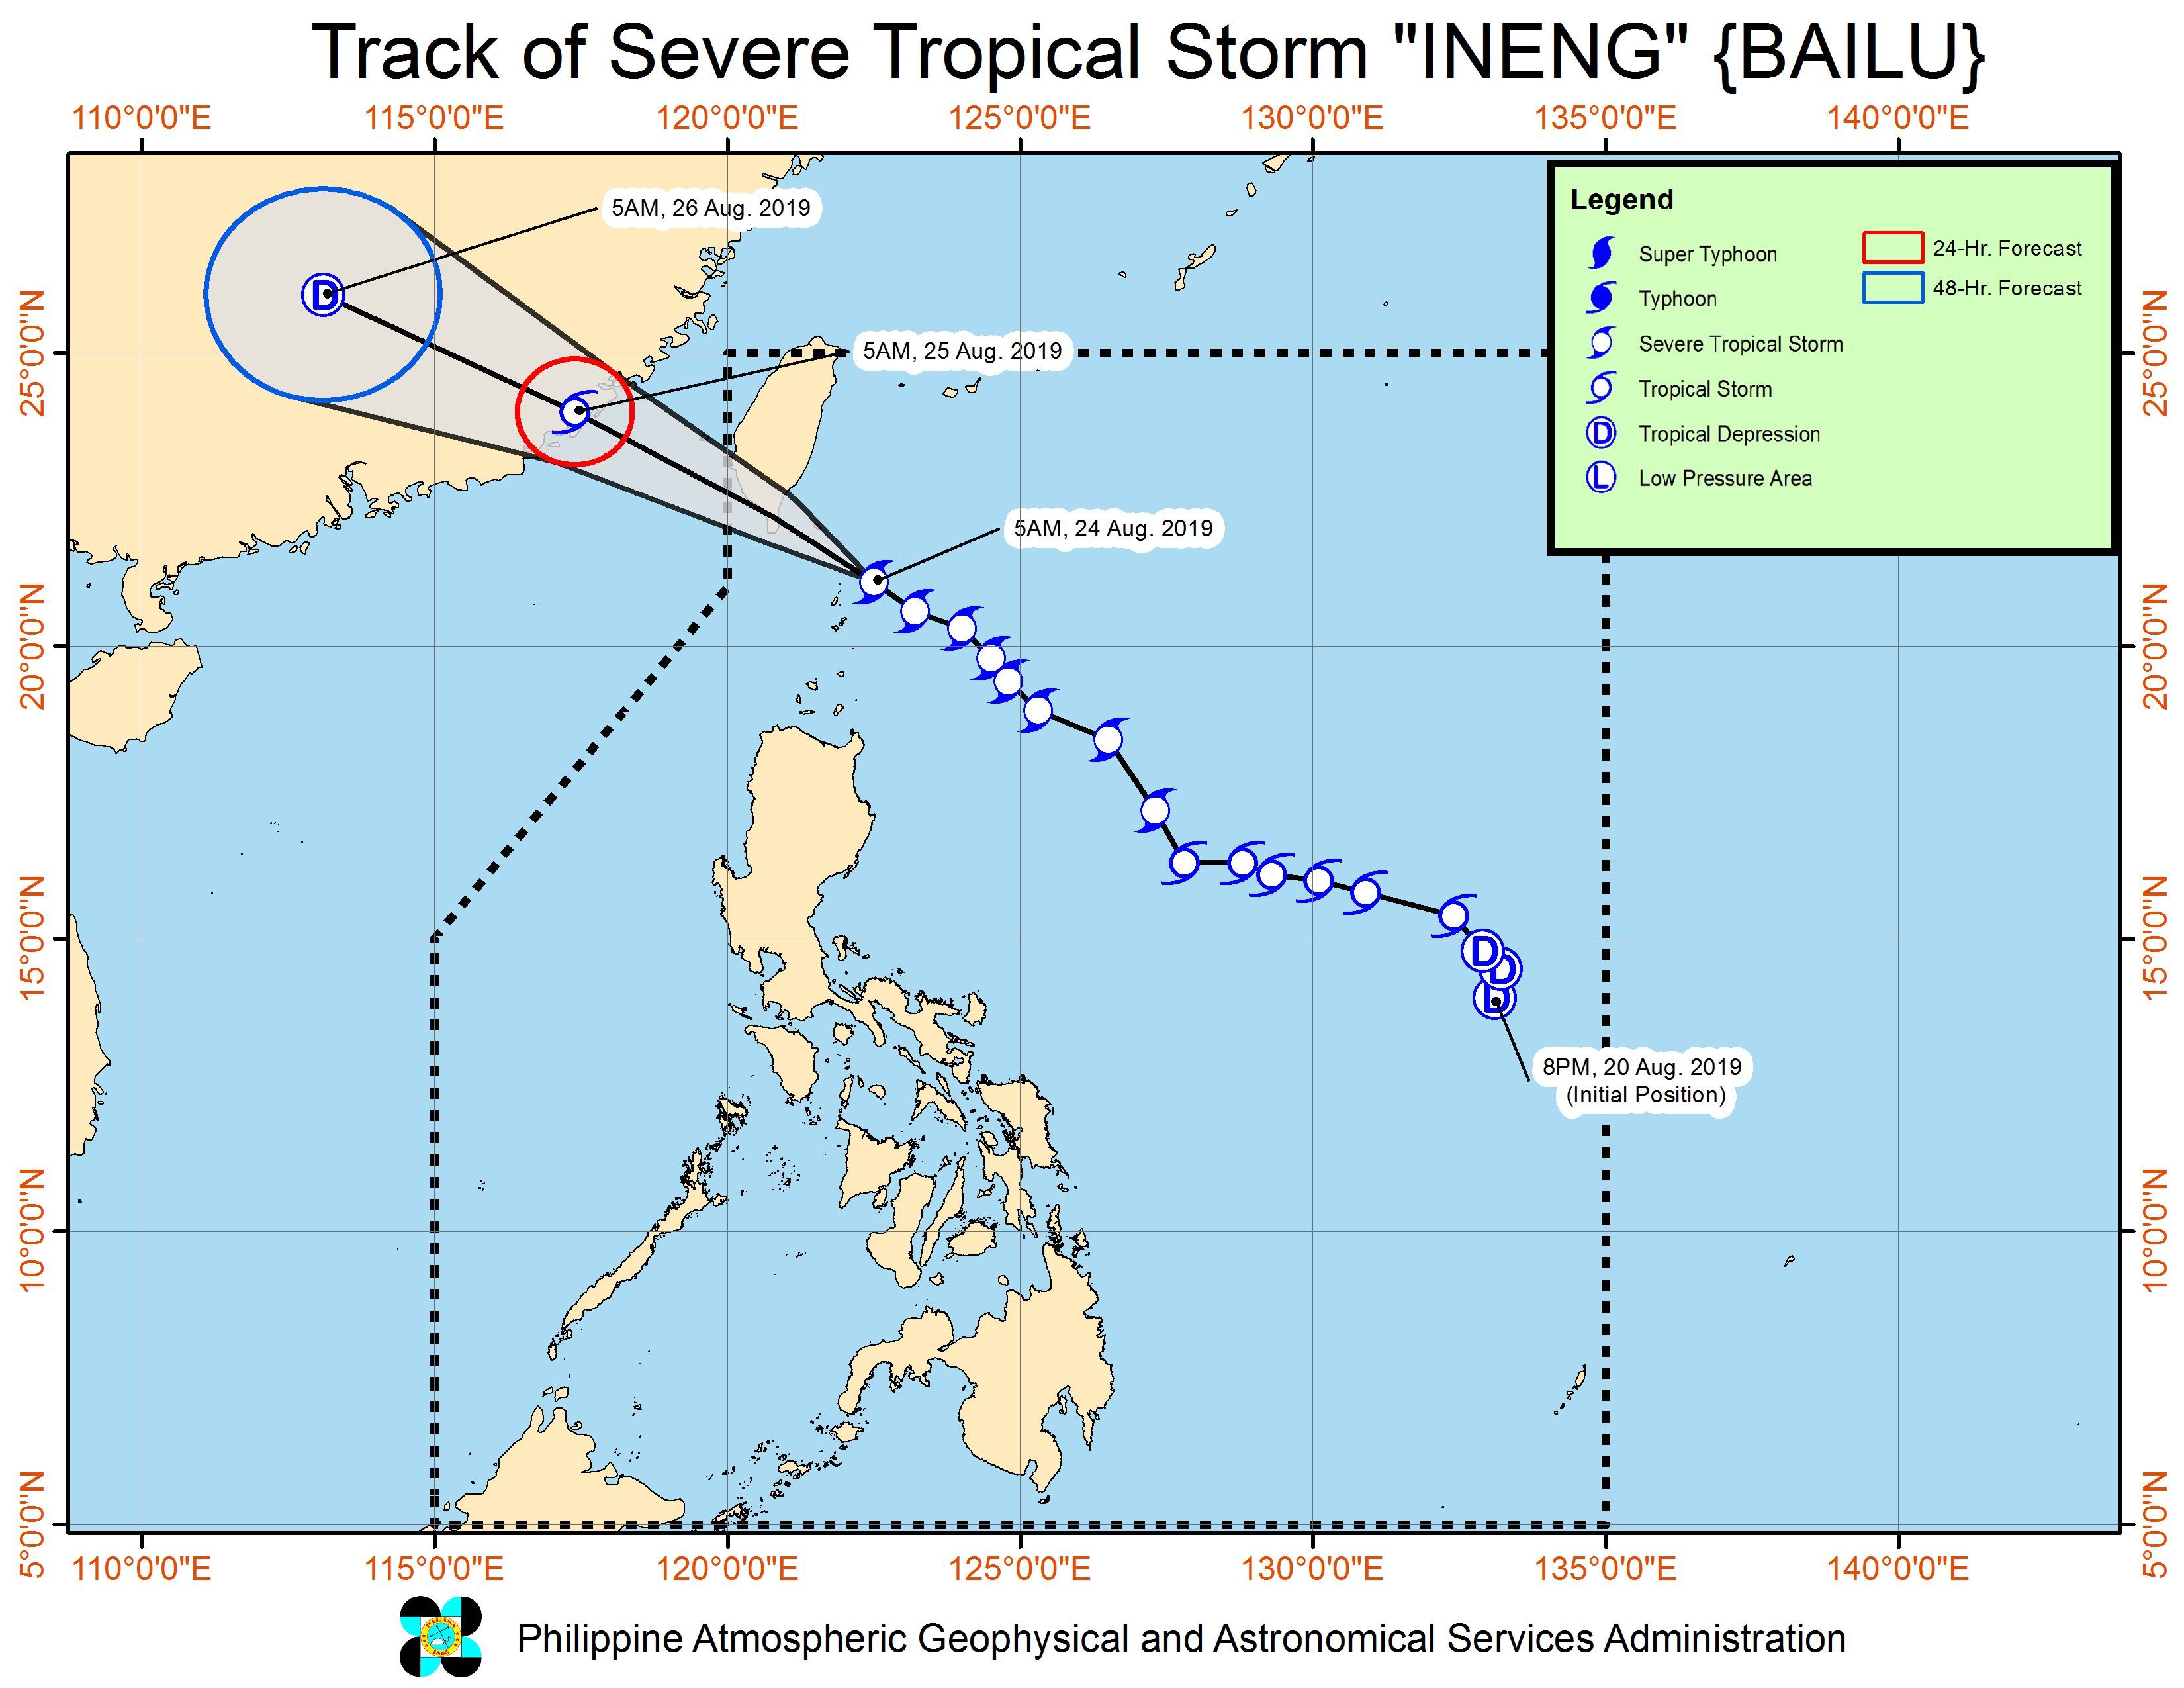 Forecast track of Severe Tropical Storm Ineng (Bailu) as of August 24, 2019, 8 am. Image from PAGASA 